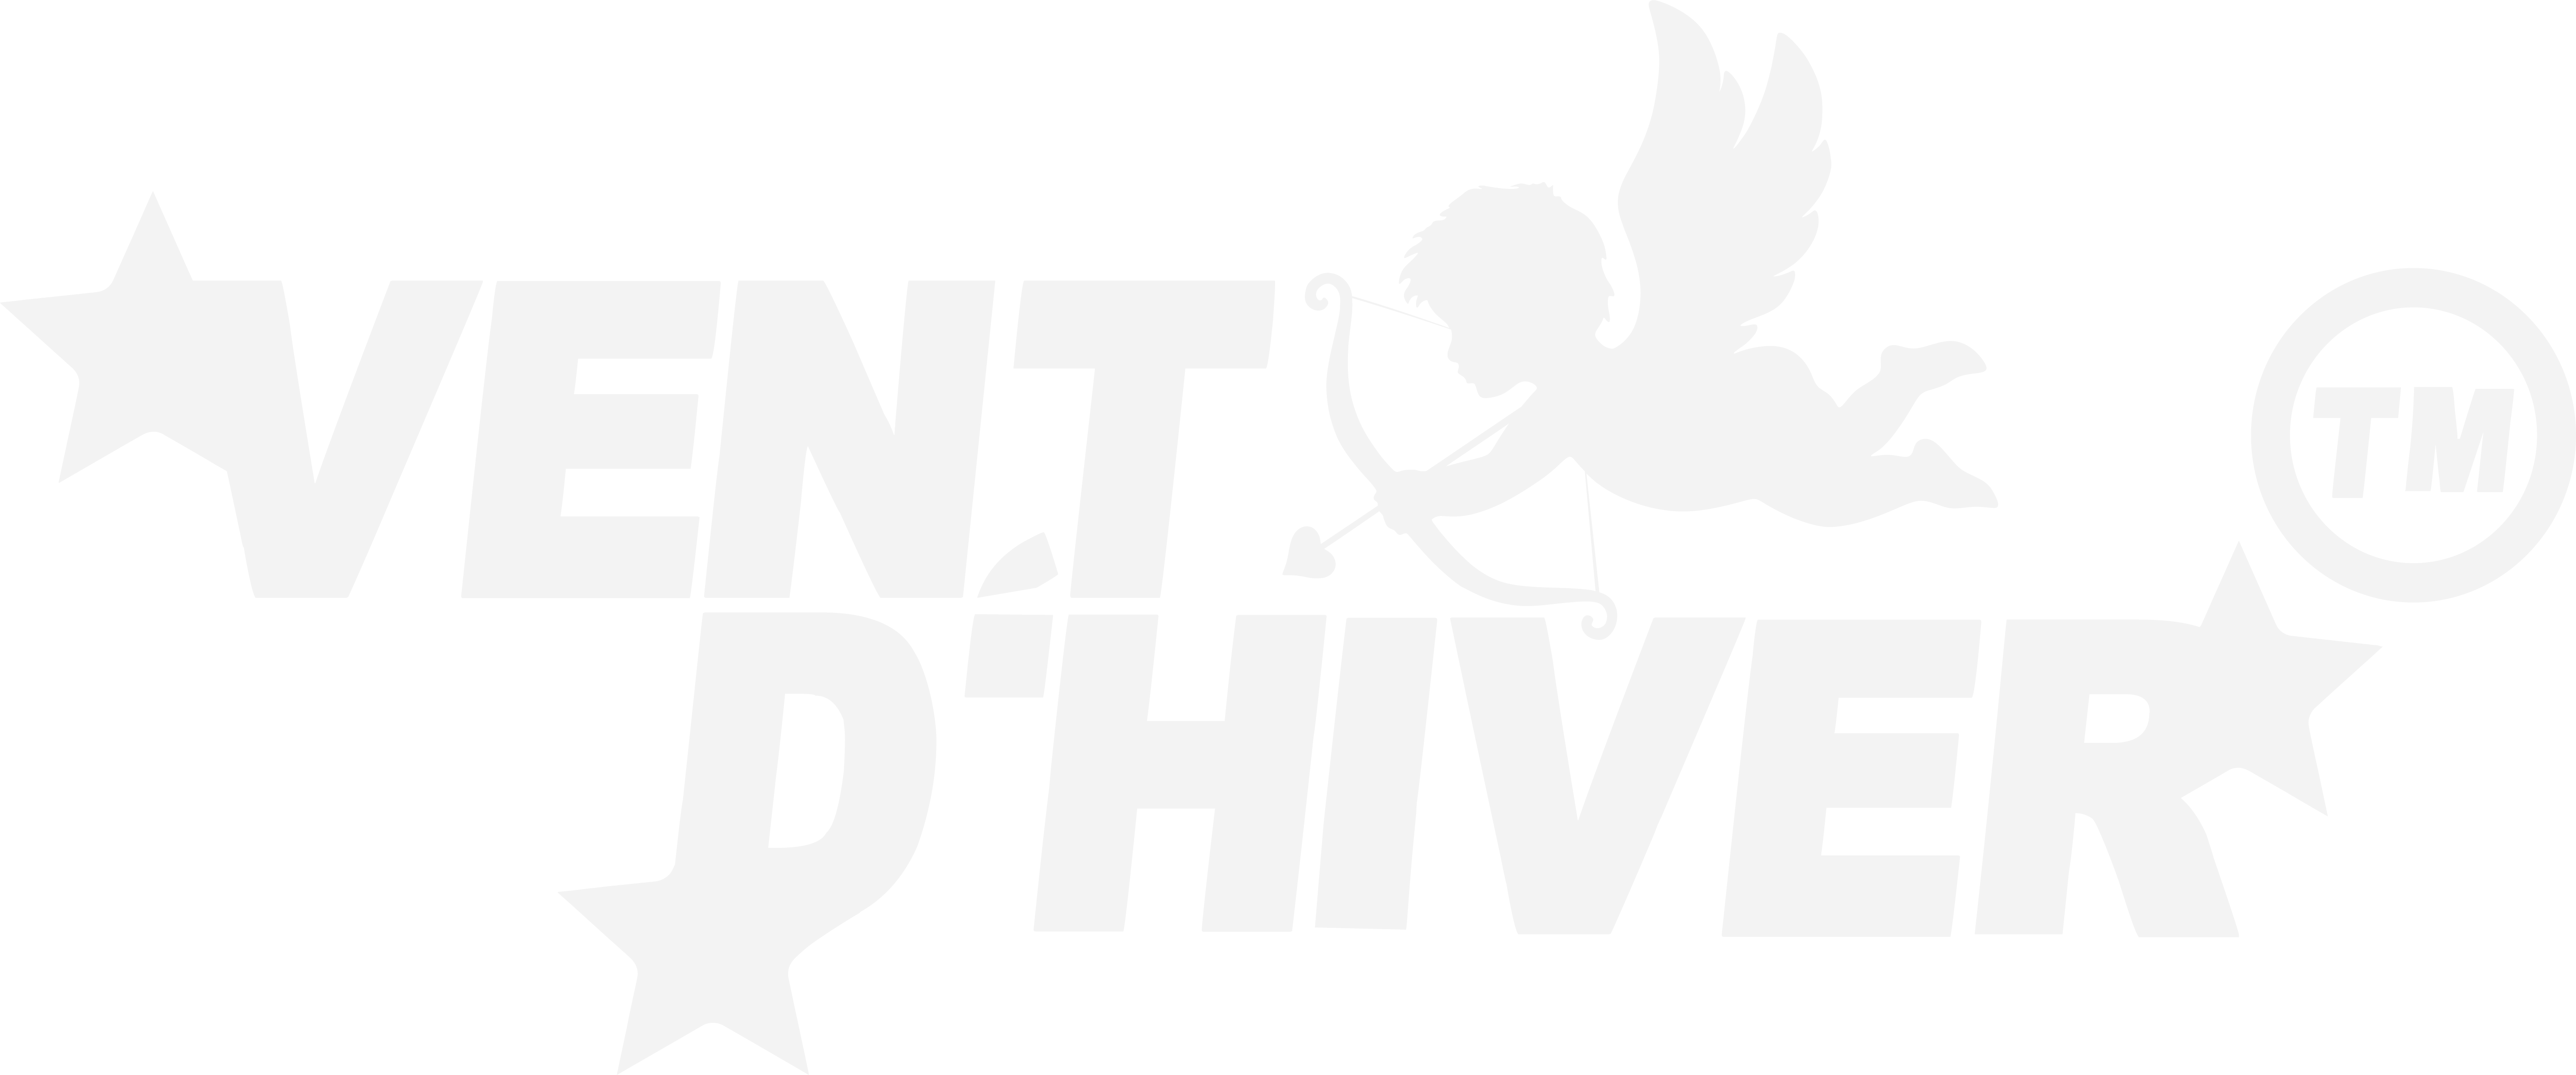 VENT D'HIVER LOGO [SPACE PUFF].png__PID:84f24500-0fe0-4921-b2f2-64ca60ae0663